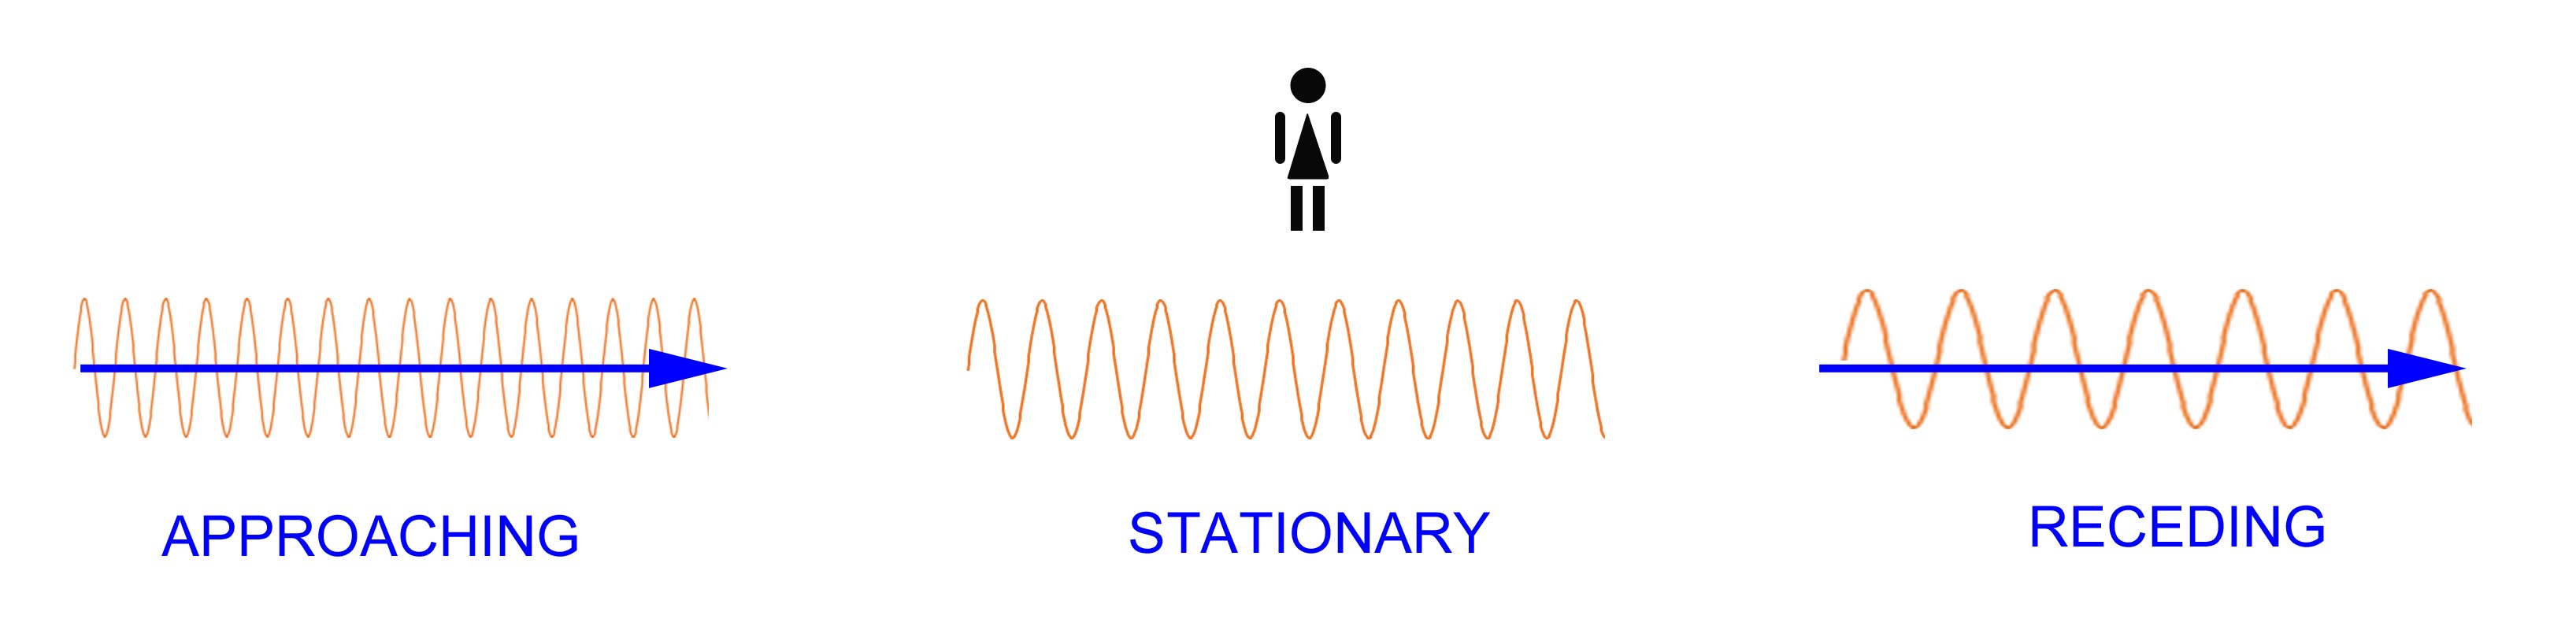 Figure 2. Waves emitted by an approaching object are compressed relative to the stationary position and are stretched out when receding. This is the Doppler Effect.